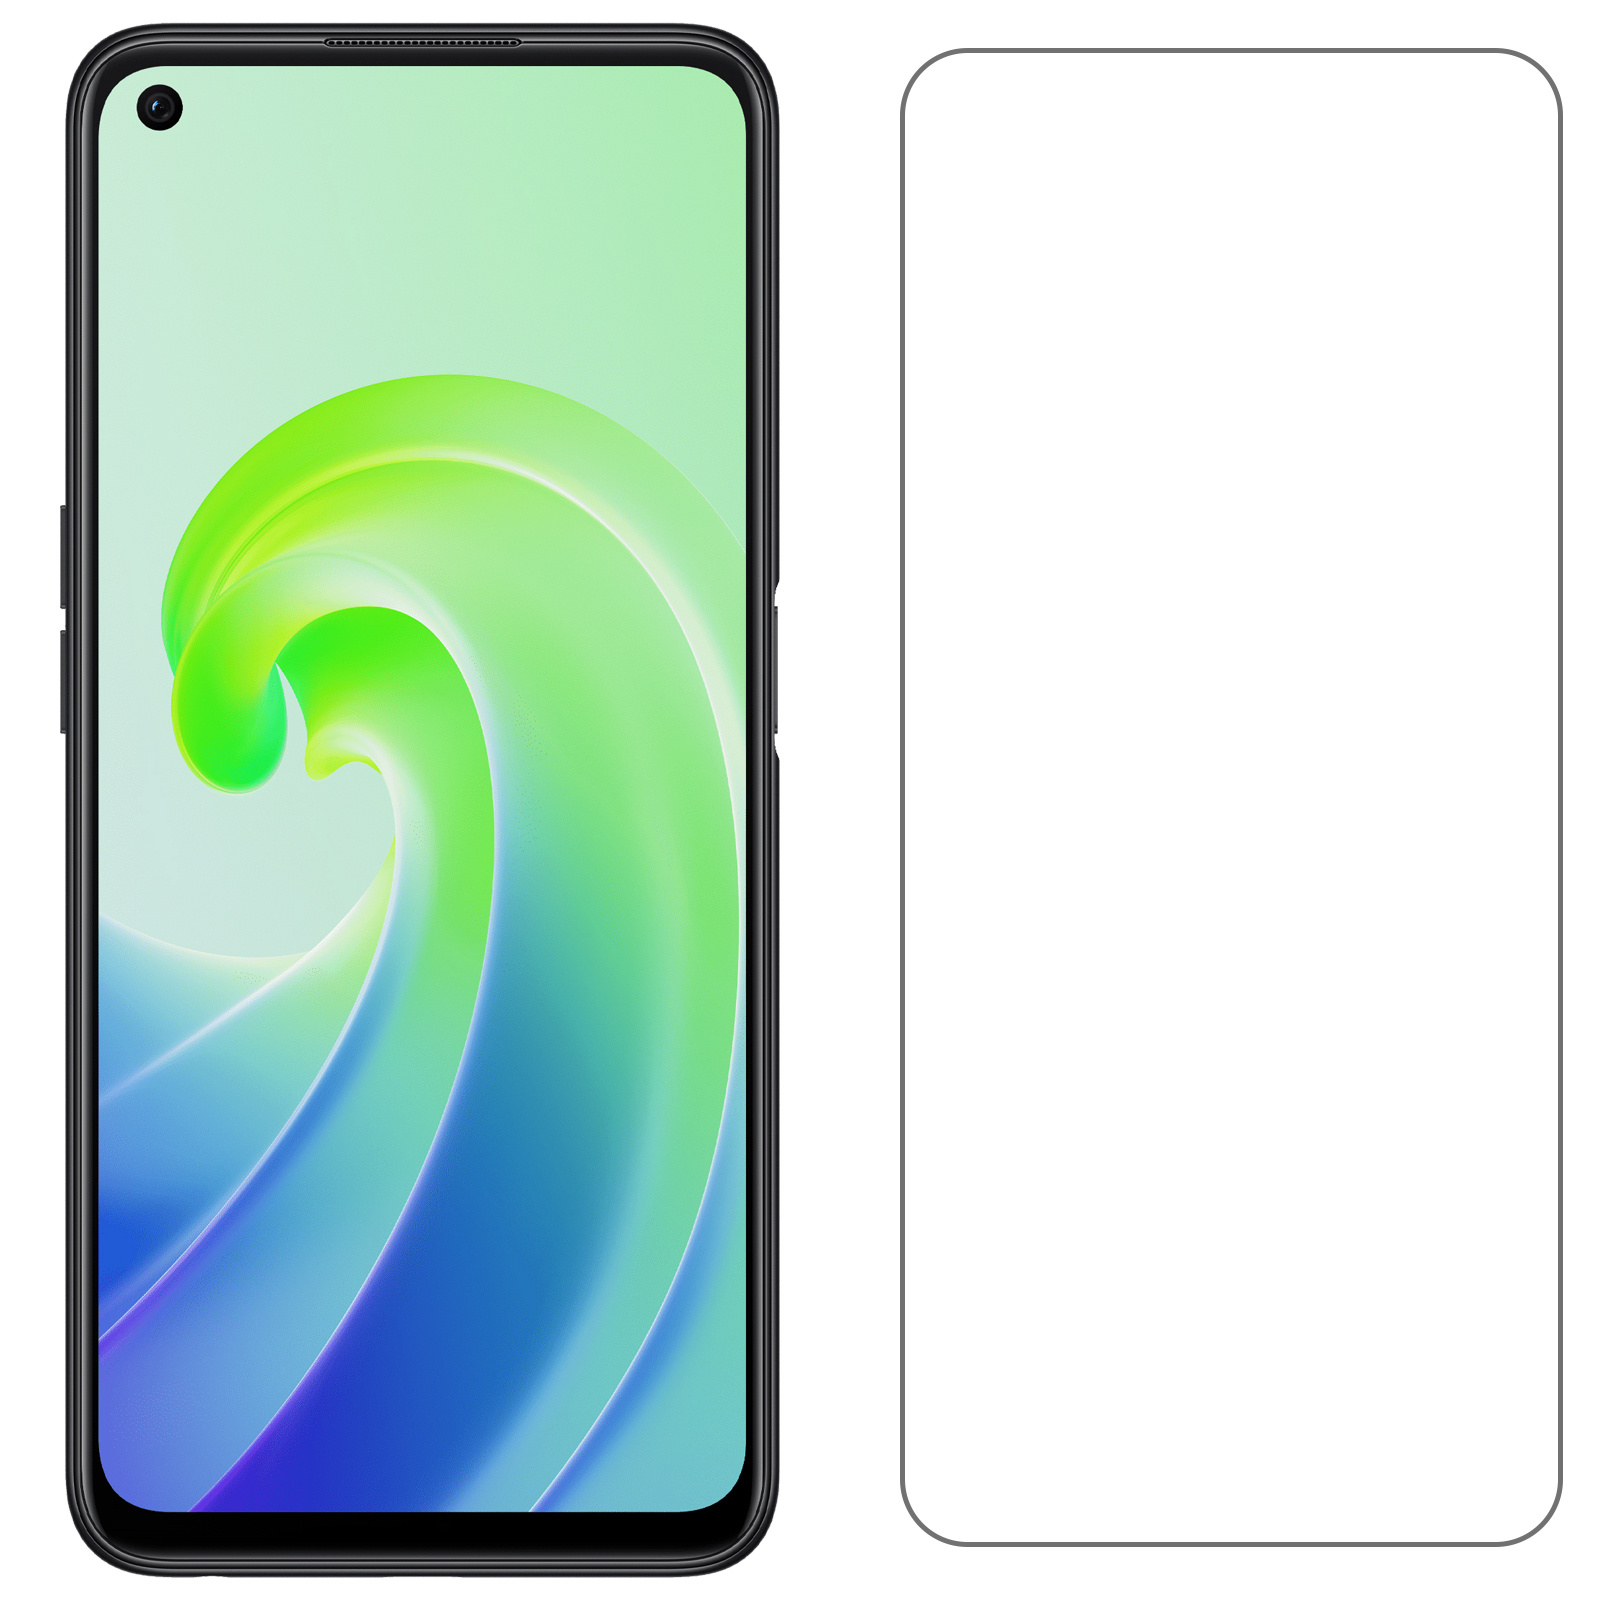 OPPO A96 Hoesje Back Cover Siliconen Case Hoes Met 2x Screenprotector - Wit